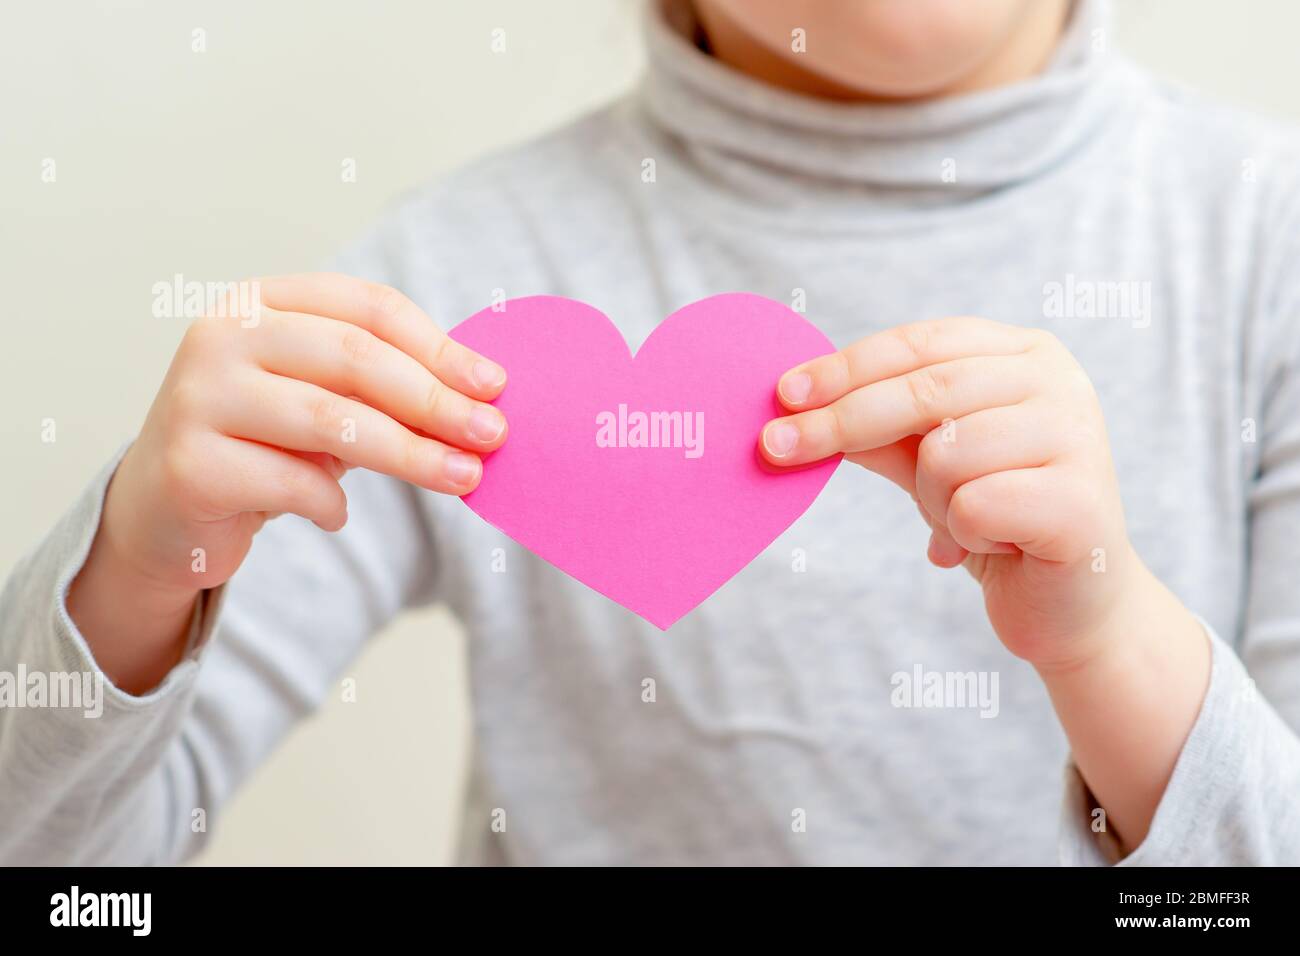 Closeup of pink paper heart in hands of child. Pink heart in child's hands. Stock Photo